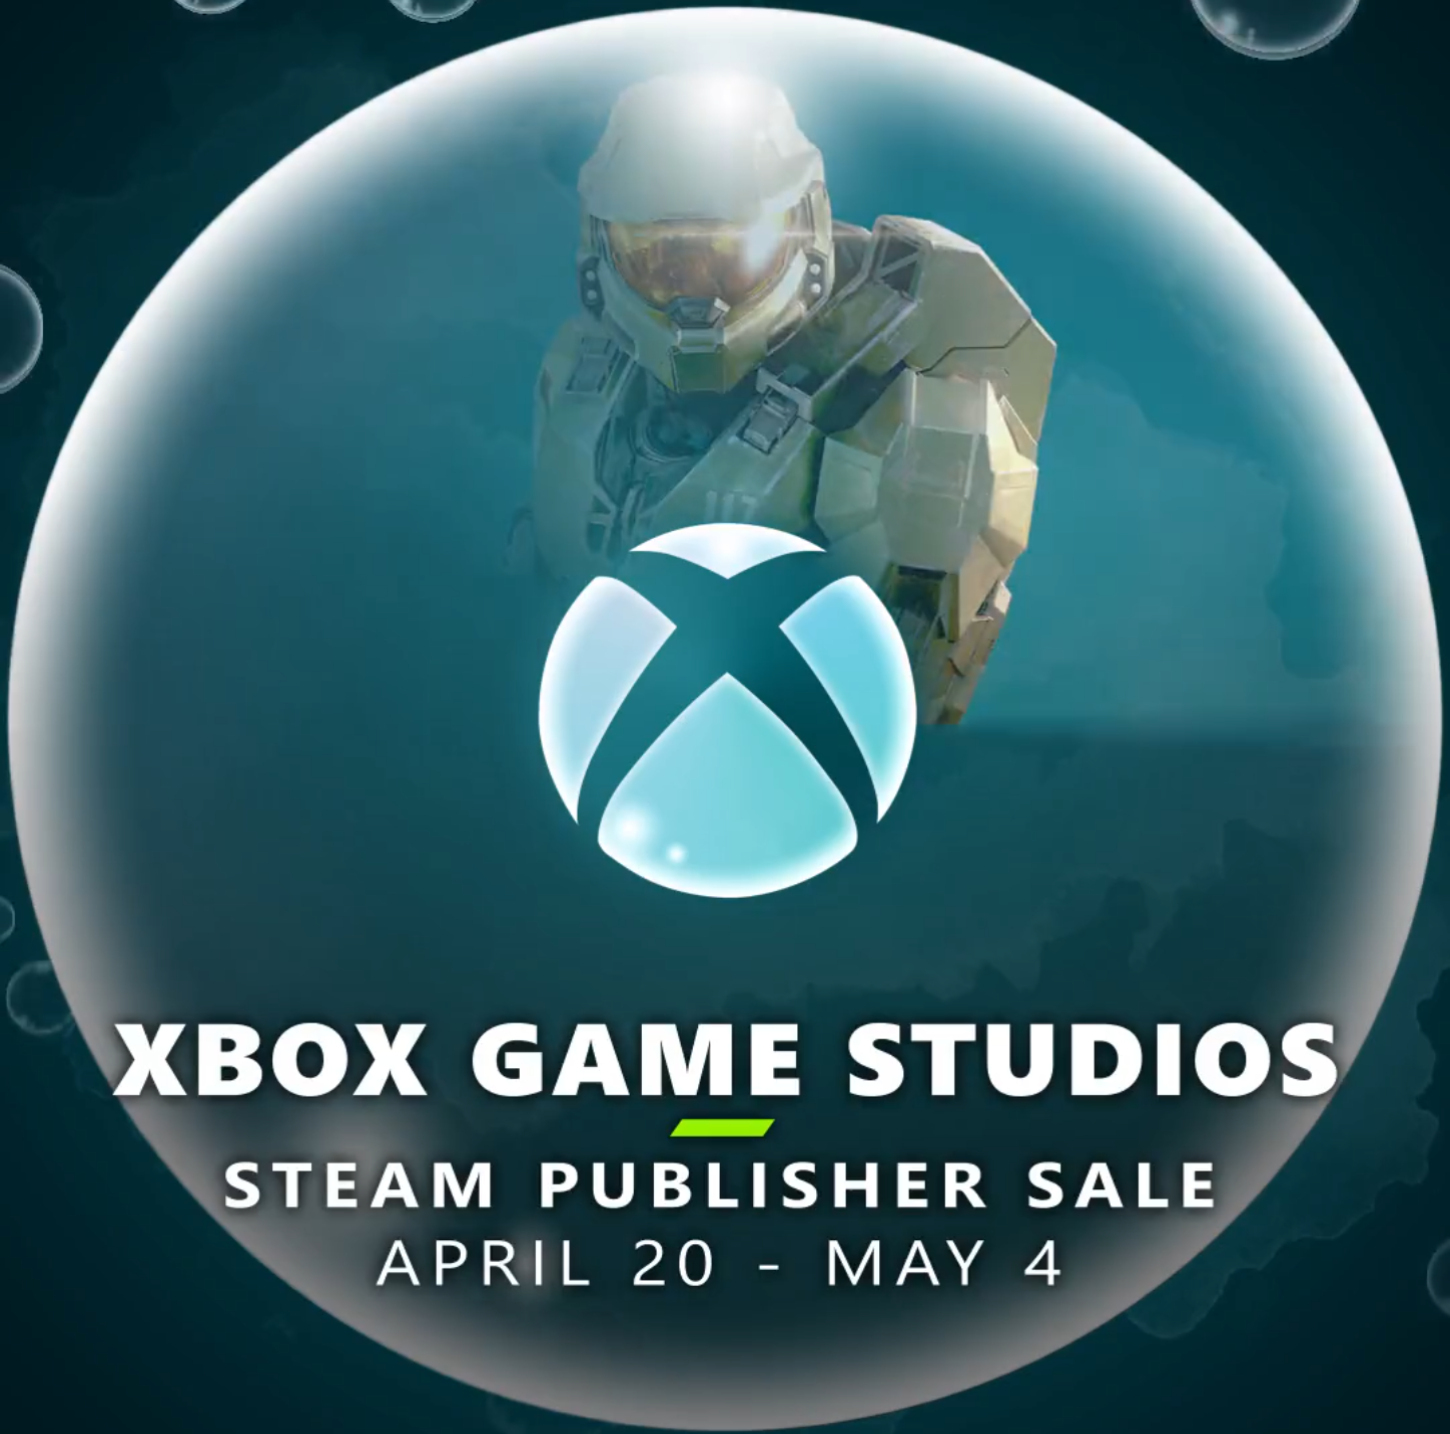 Xbox Games published by Xbox Game Studios